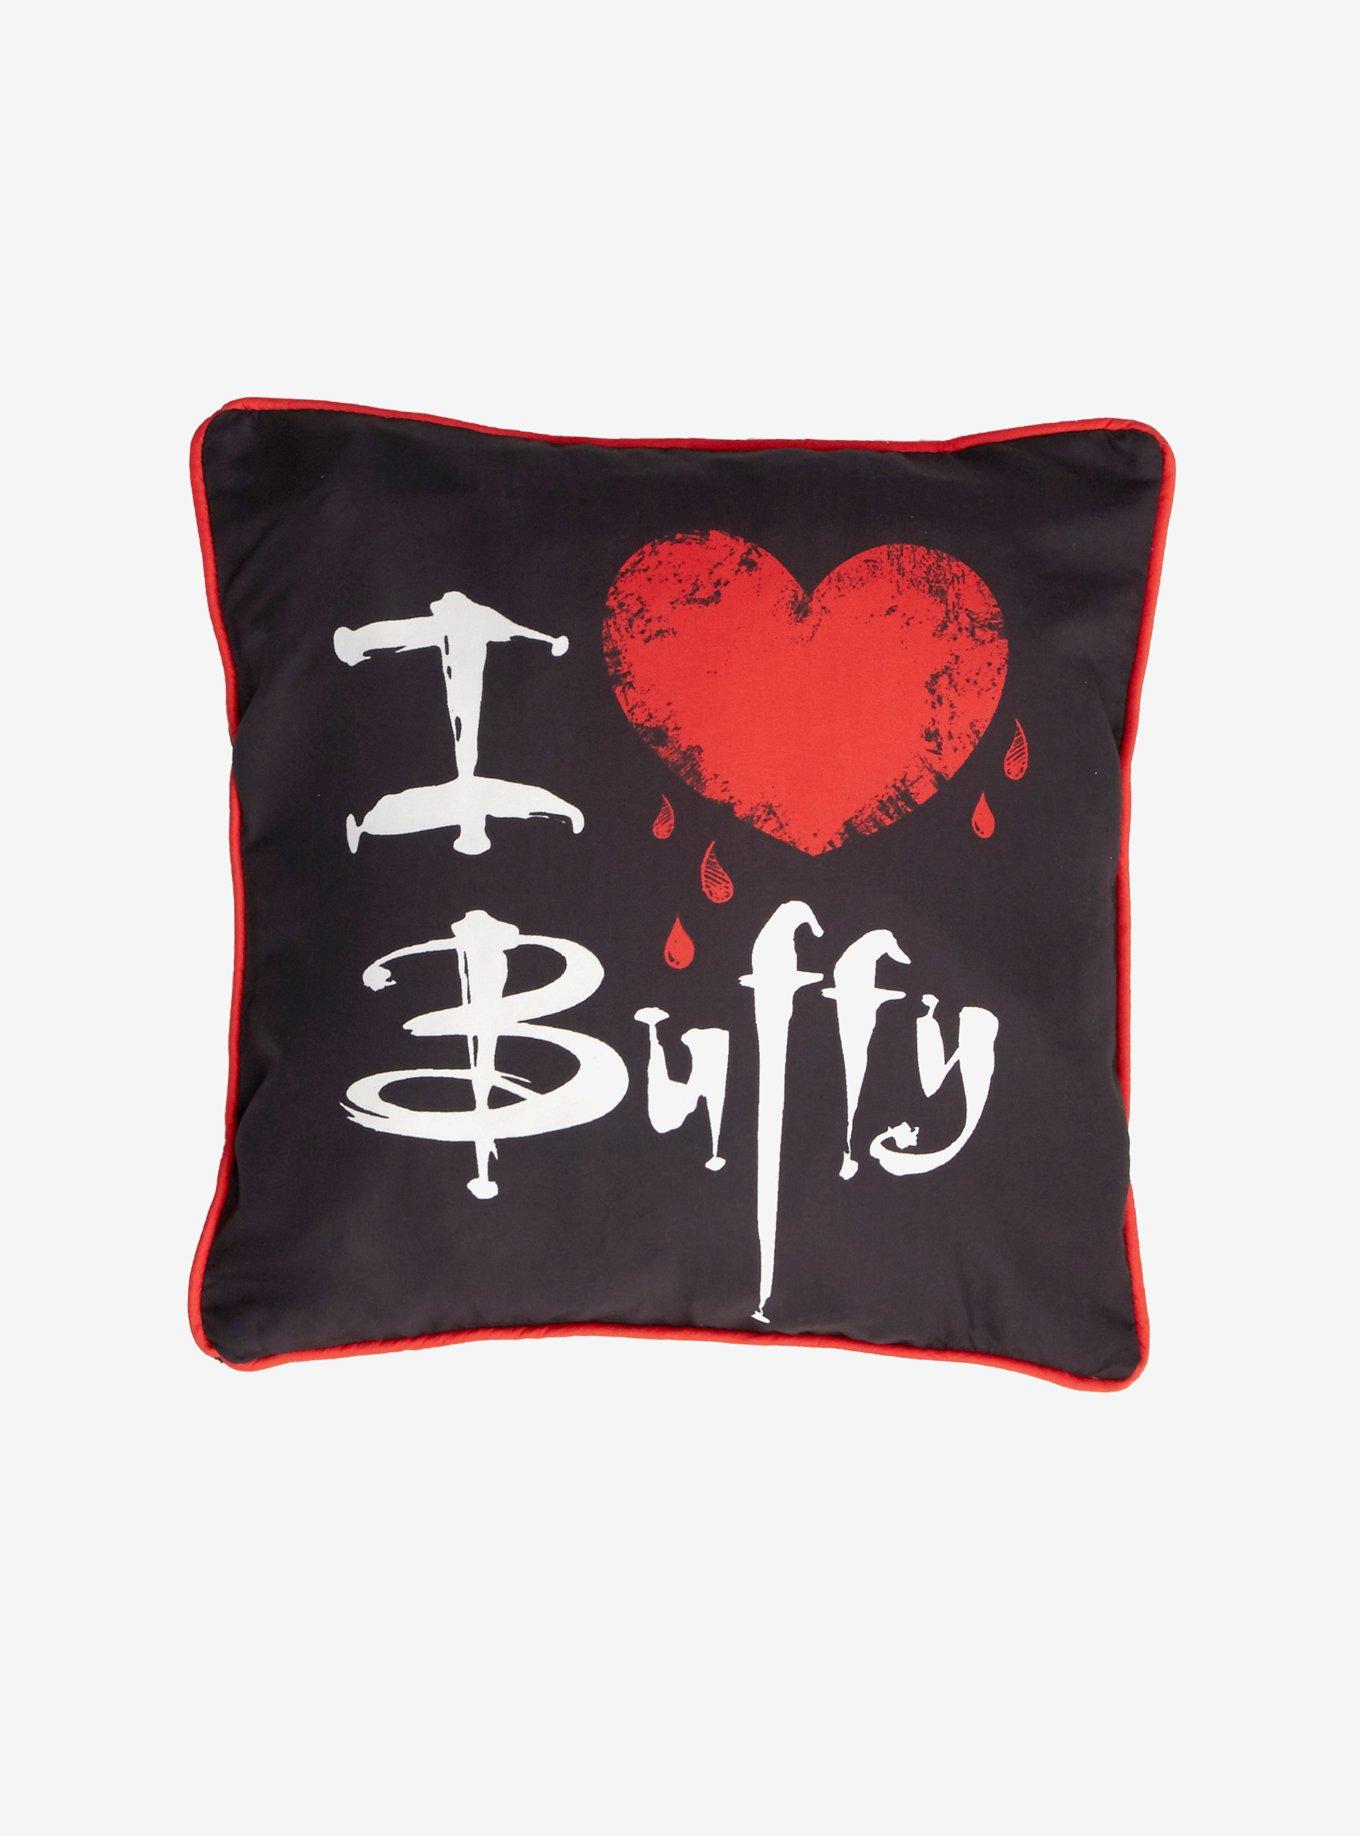 Buffy The Vampire Slayer Decorative Pillow Cover, , hi-res